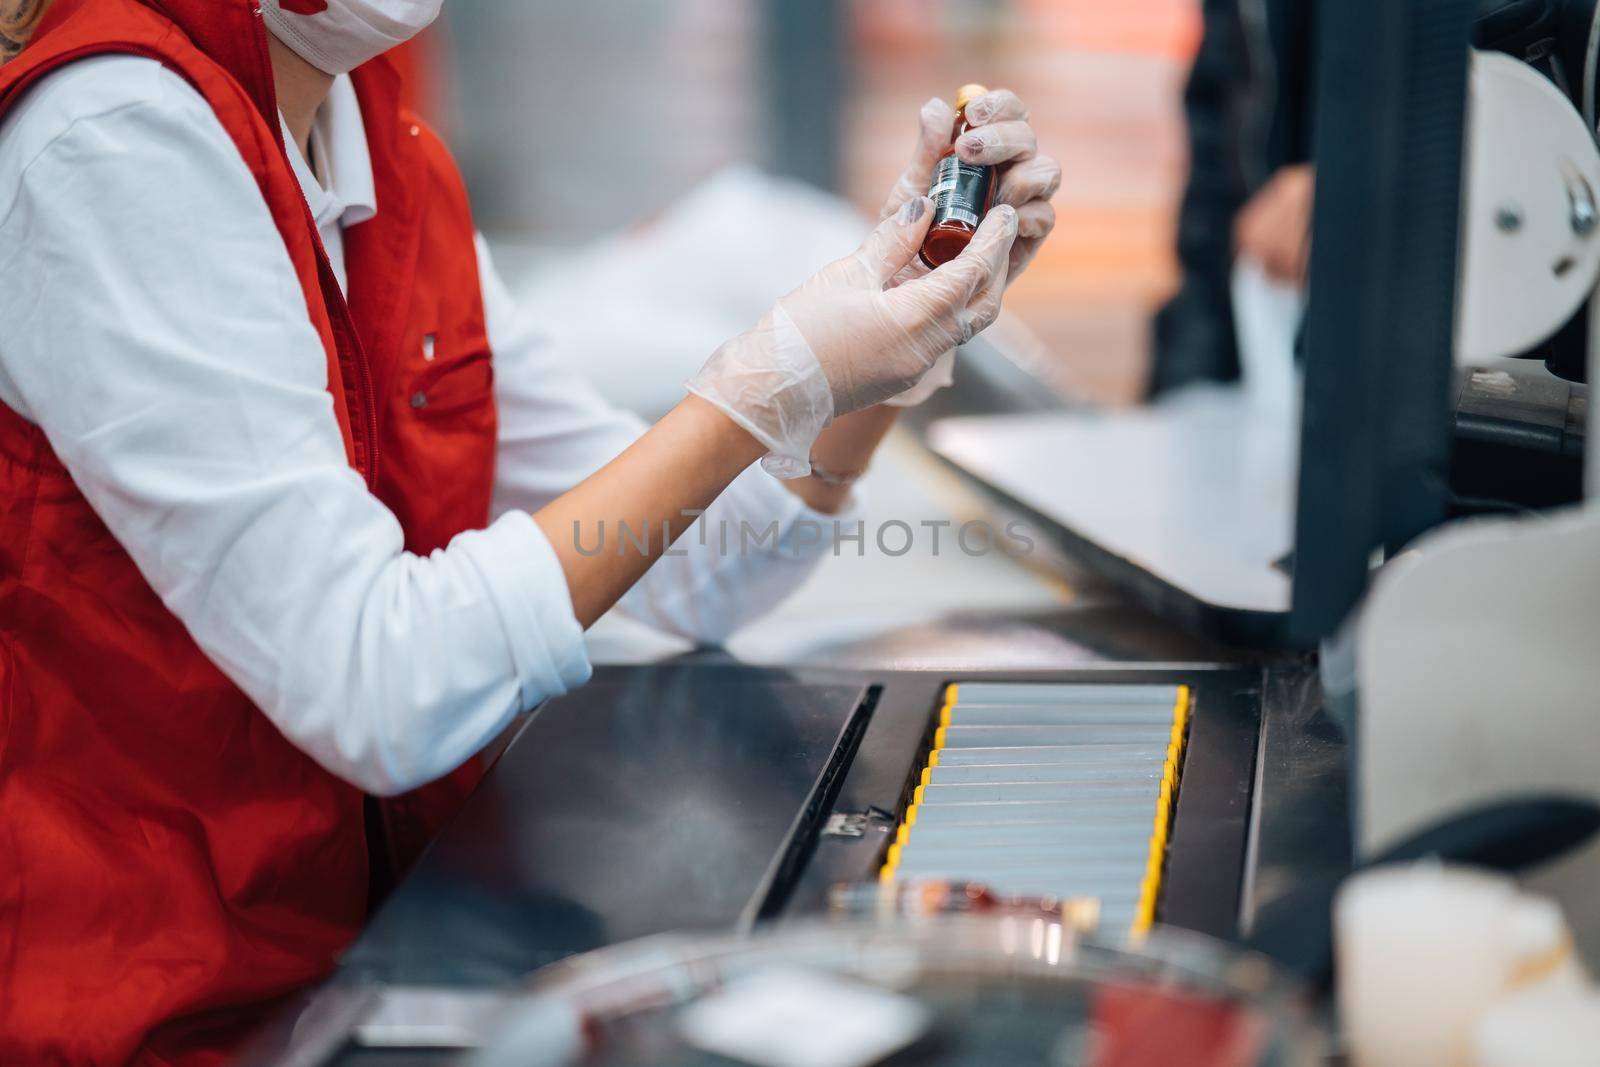 A woman reads the bar code at checkout machine